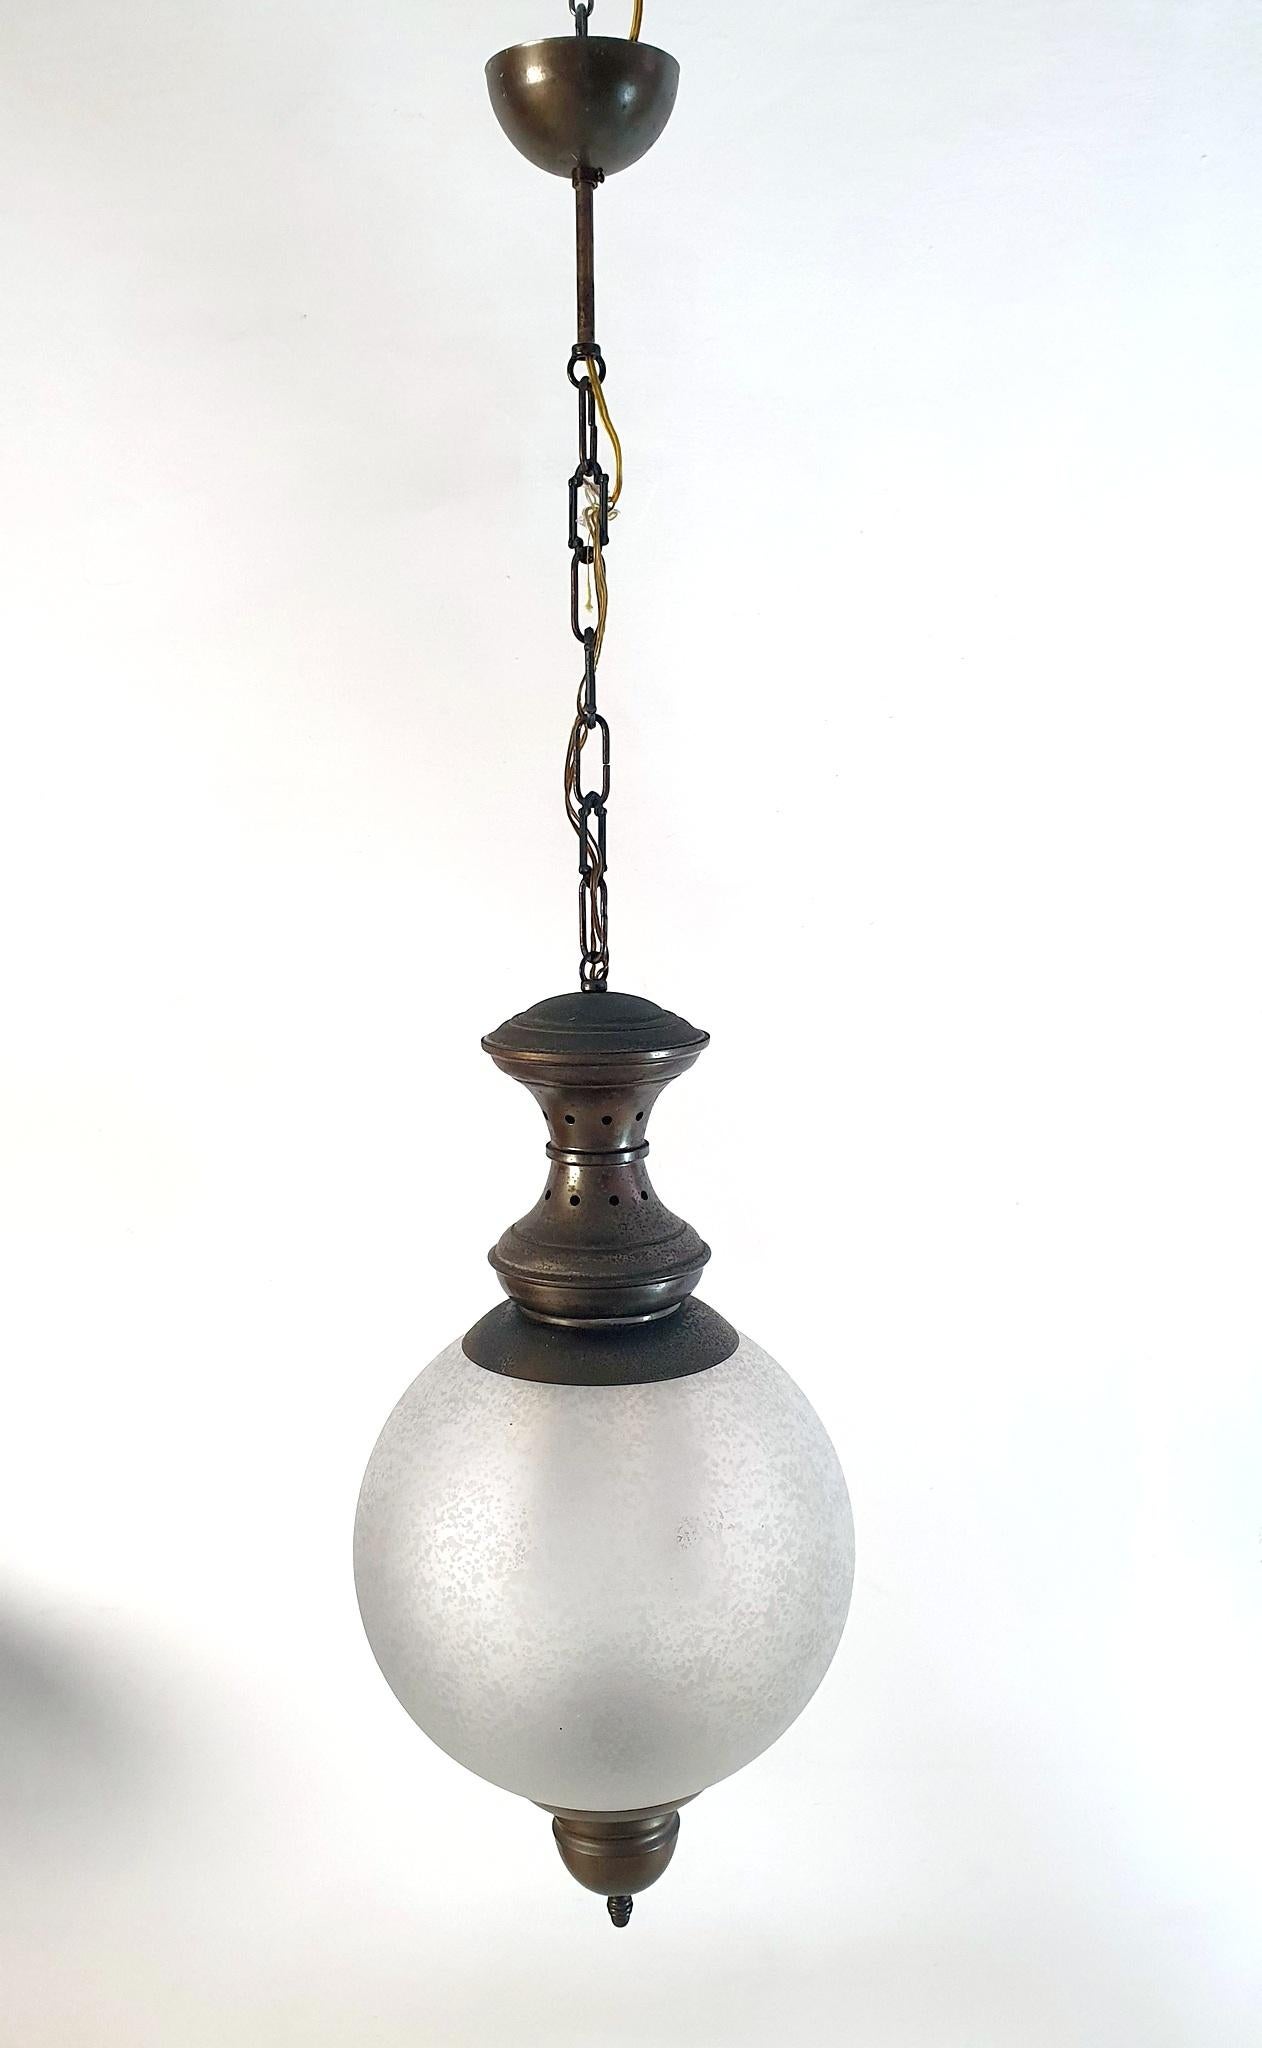 Italian Mid-Century Modern pendant lamp designed by Luigi Caccia Dominioni for Azucena during the 1950s.
The model is named LS1 and has frosted glass and bronzed iron metal details. We have purpously not restored this piece but rather left it in the